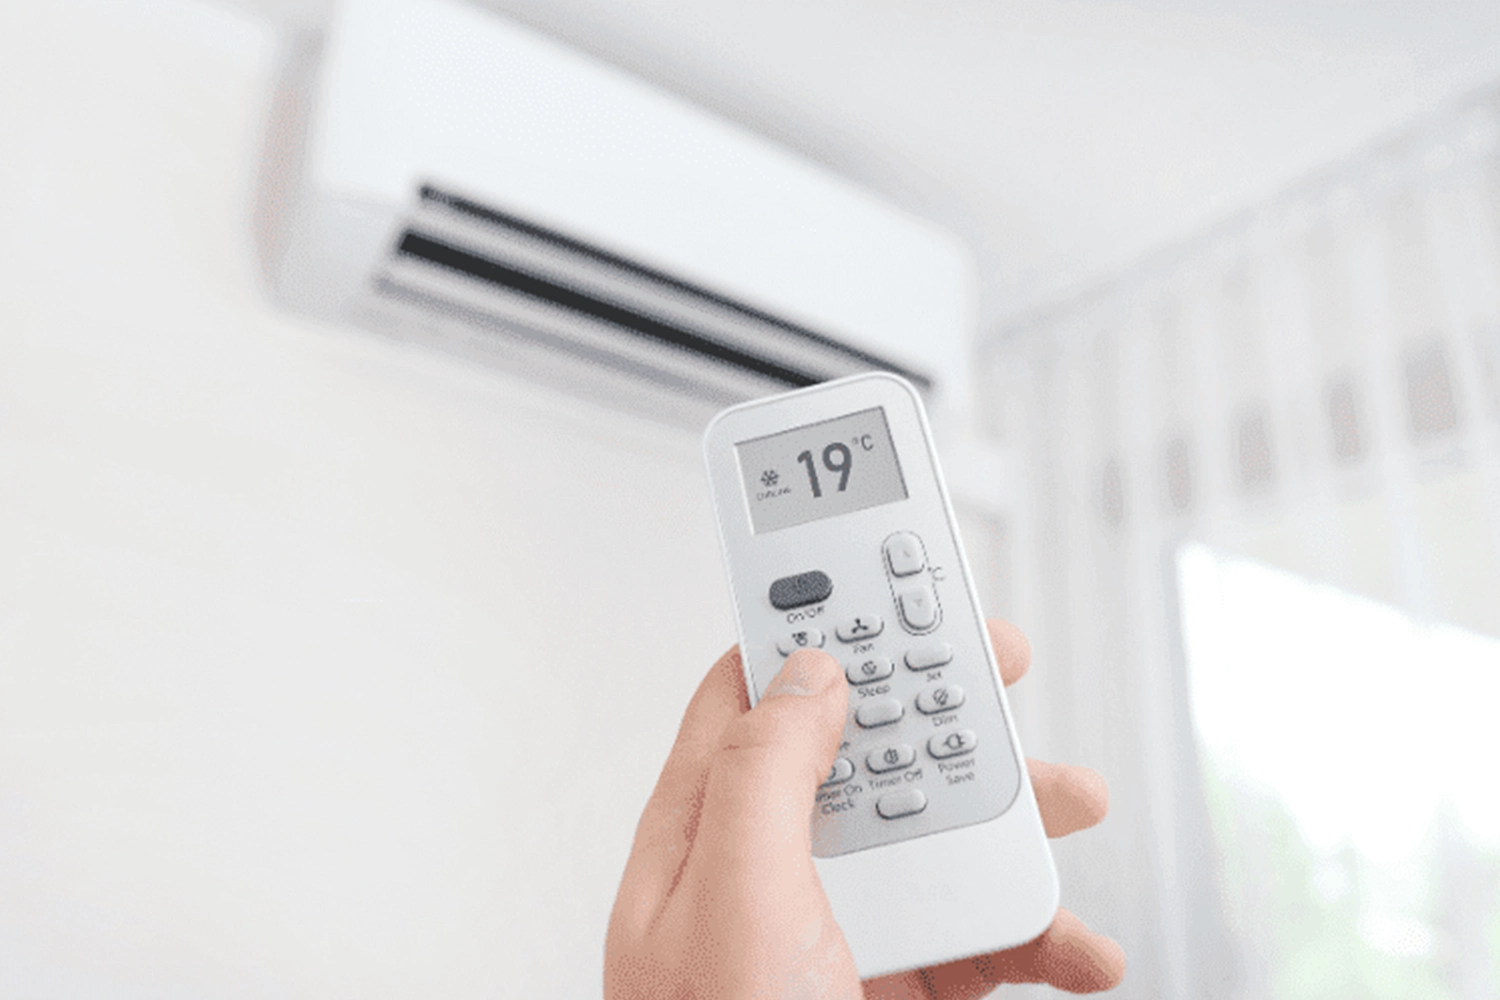 An air conditioner with a remote control displaying 19°C, raises the question of how much air conditioning costs per month